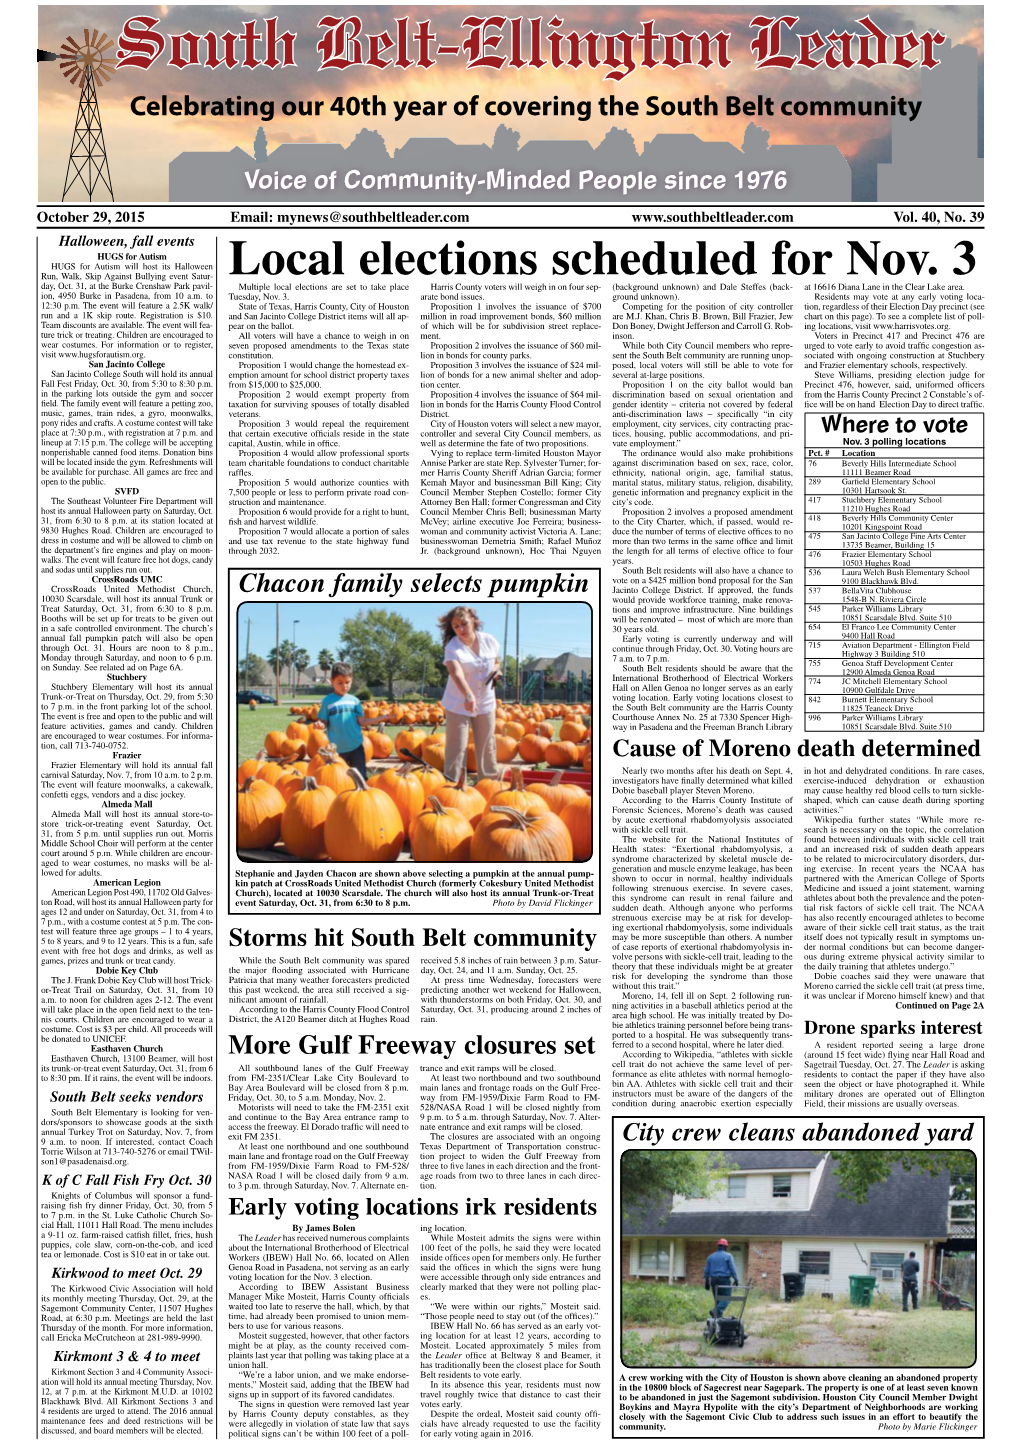 Local Elections Scheduled for Nov. 3 Day, Oct